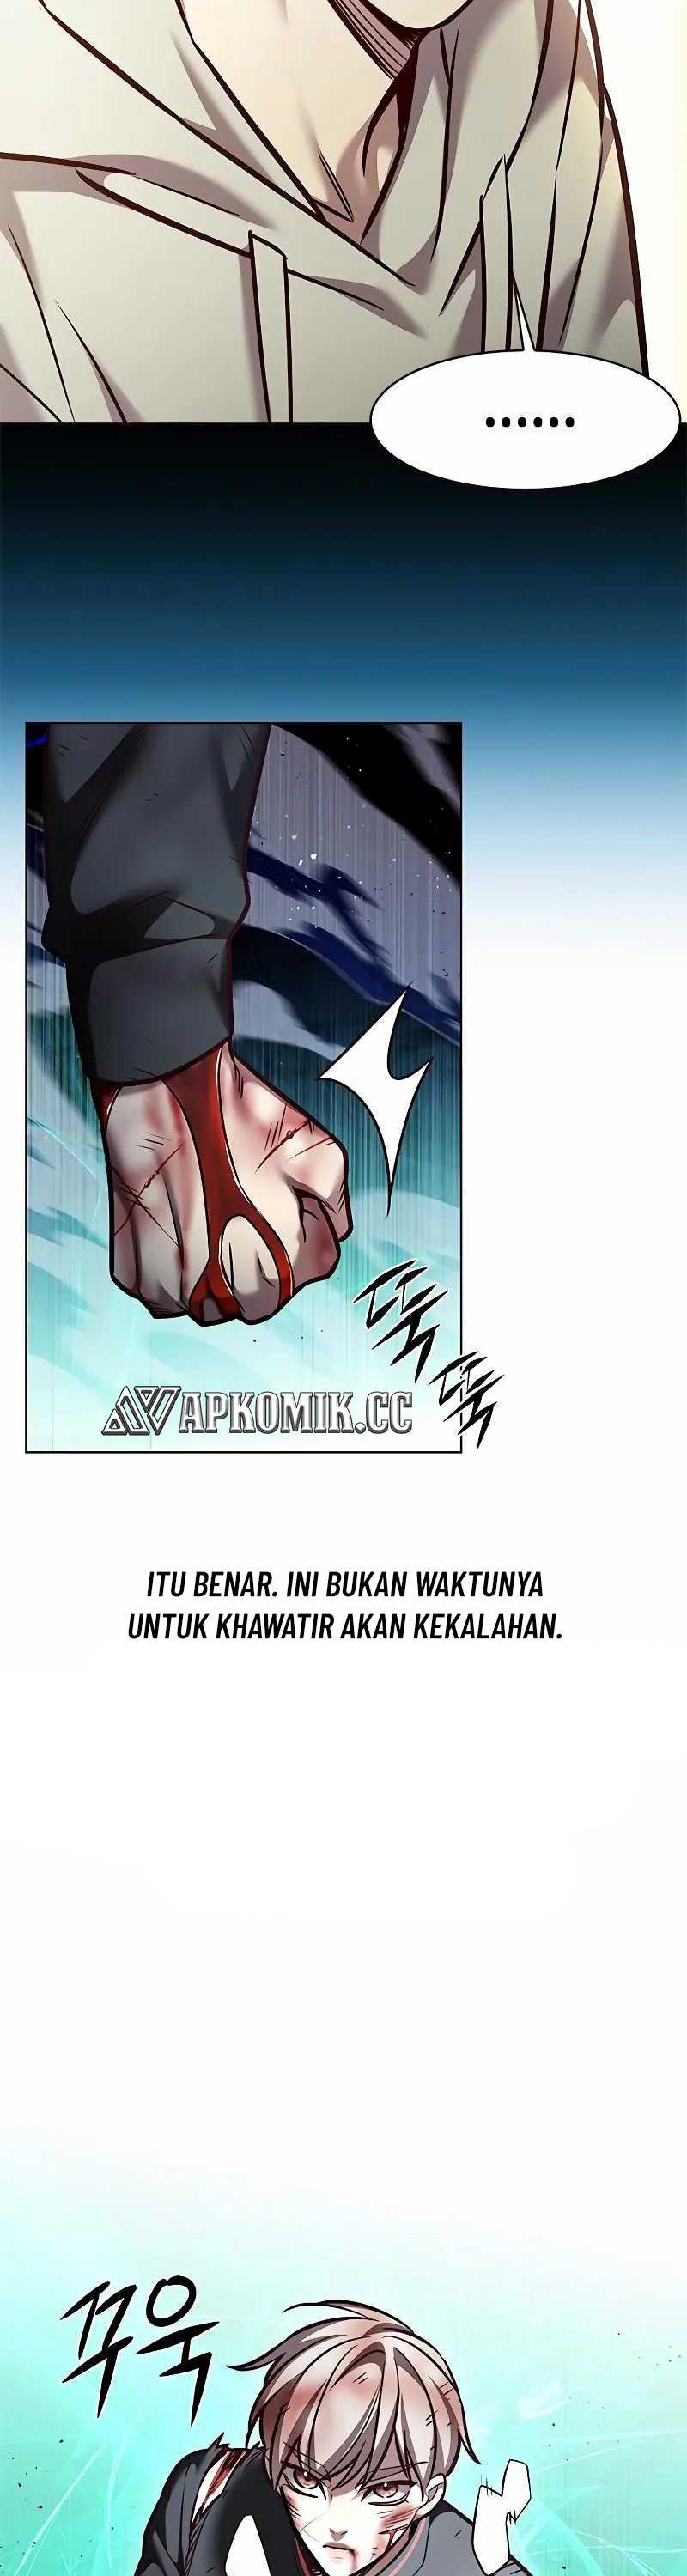 Eleceed Chapter 288